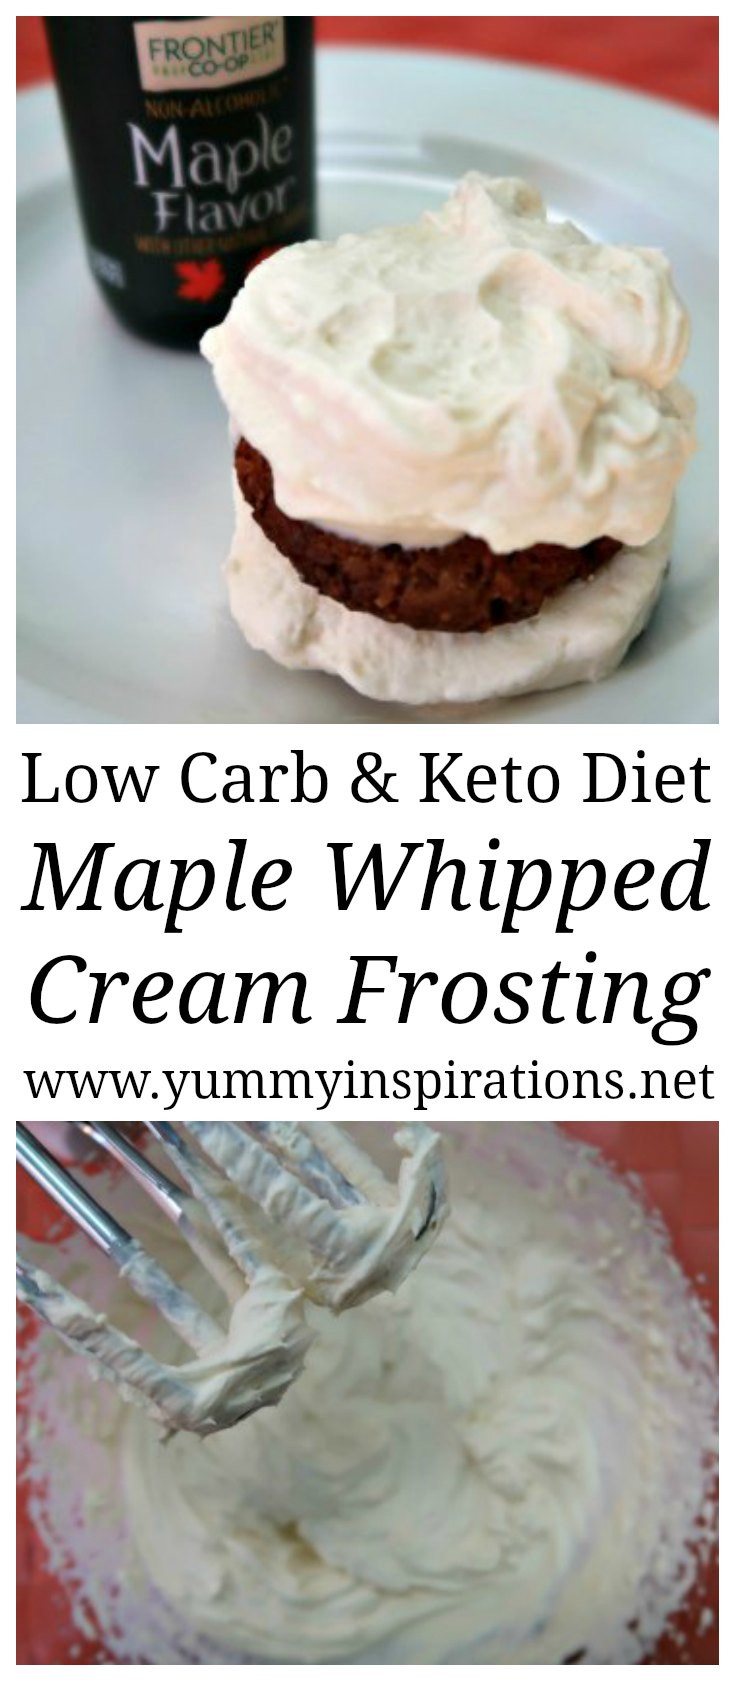 Easy Desserts With Heavy Whipping Cream
 Keto Maple Whipped Cream Frosting Recipe Easy Low Carb